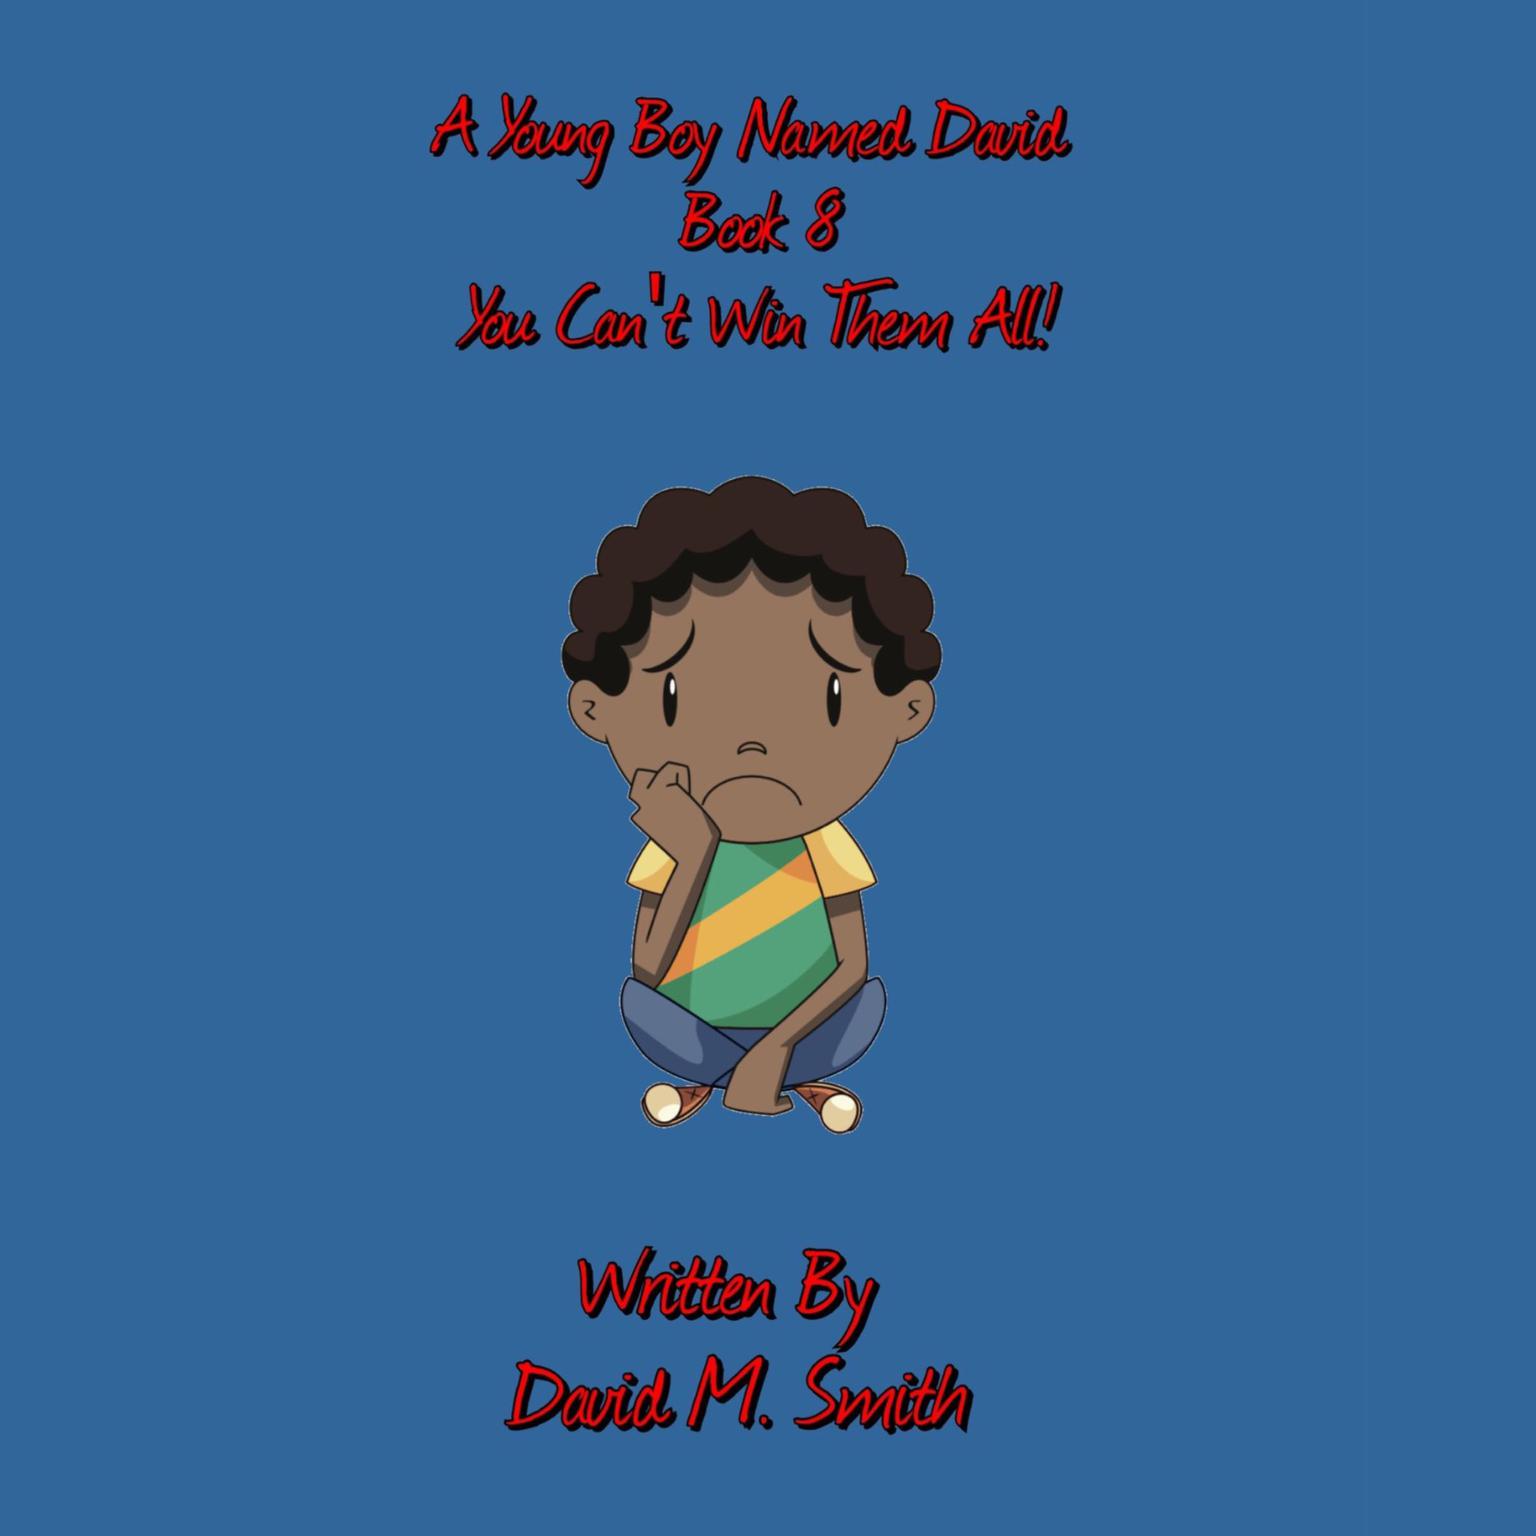 A Young Boy Named David Book 8: You Cant Win Them All! Audiobook, by David M. Smith